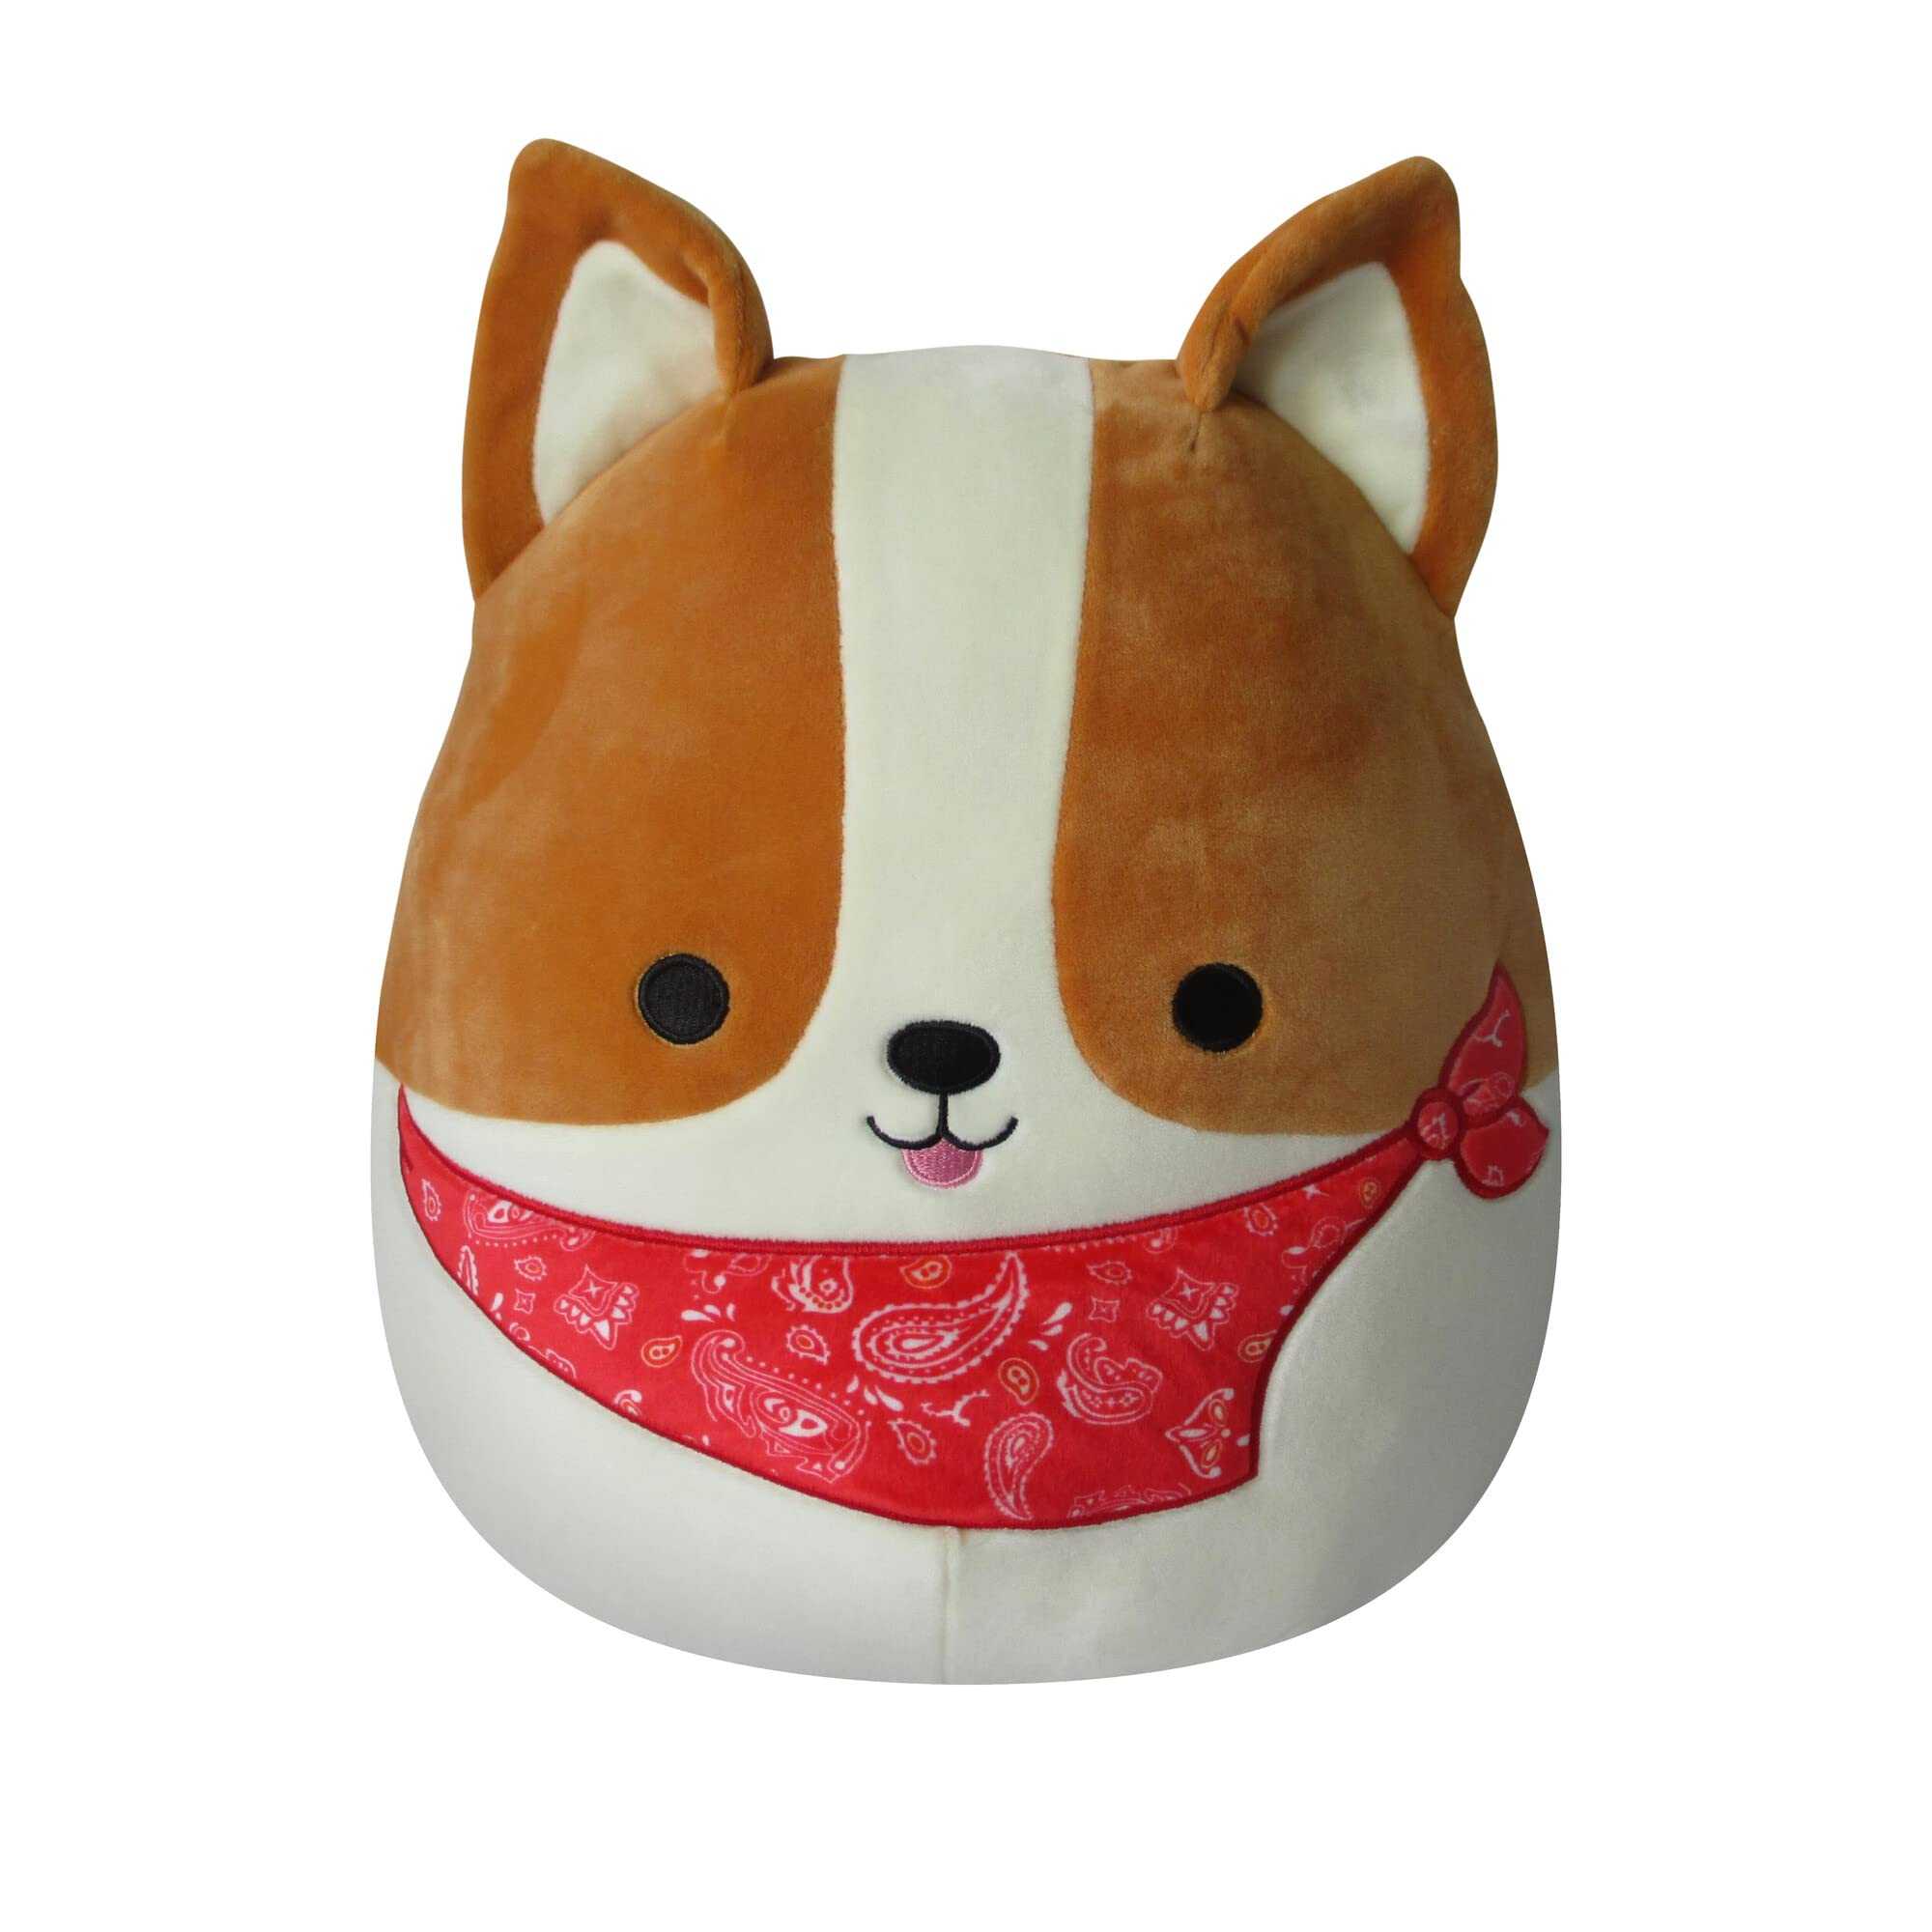 Squishmallows Hottest Toy on Market, Adults Driving Sales